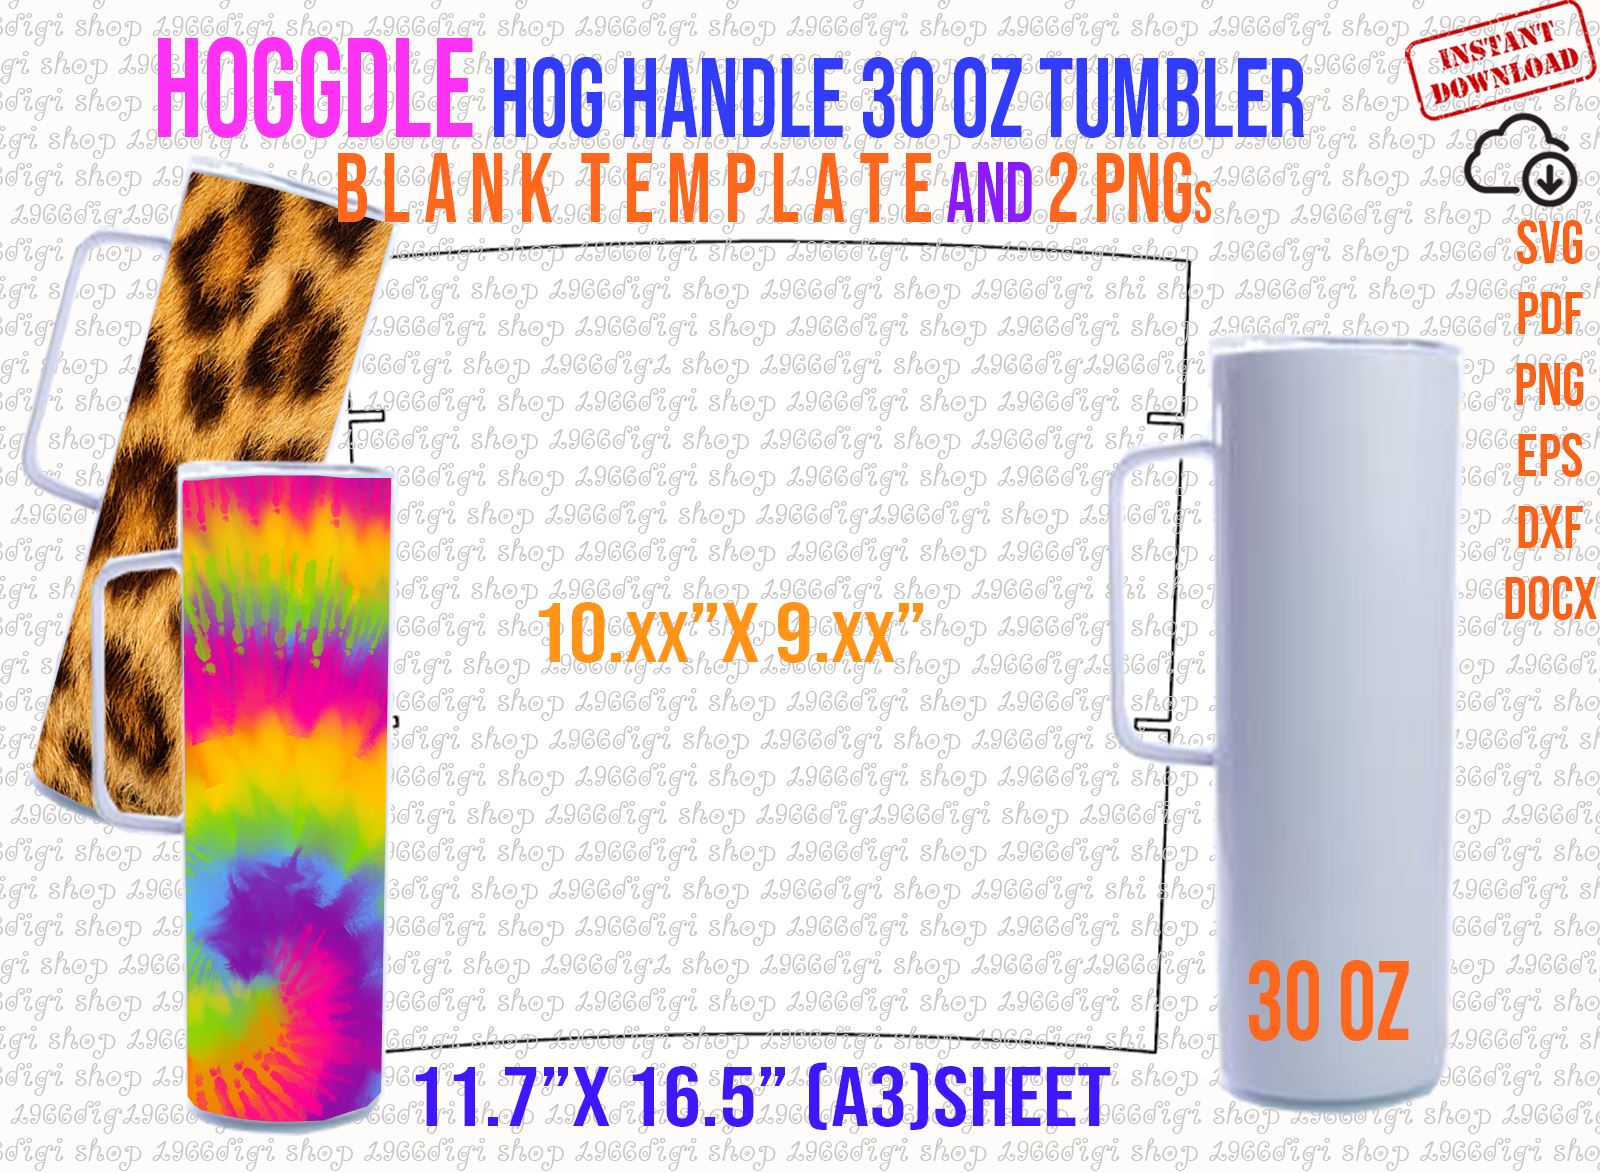 Hogg Skinny With Handle 30oz Tumbler Template Full Wrap for 30oz Hoggdle Skinny  Tumbler Template Cricut and Slhouette Svg Dxf Png Pdf Docx 